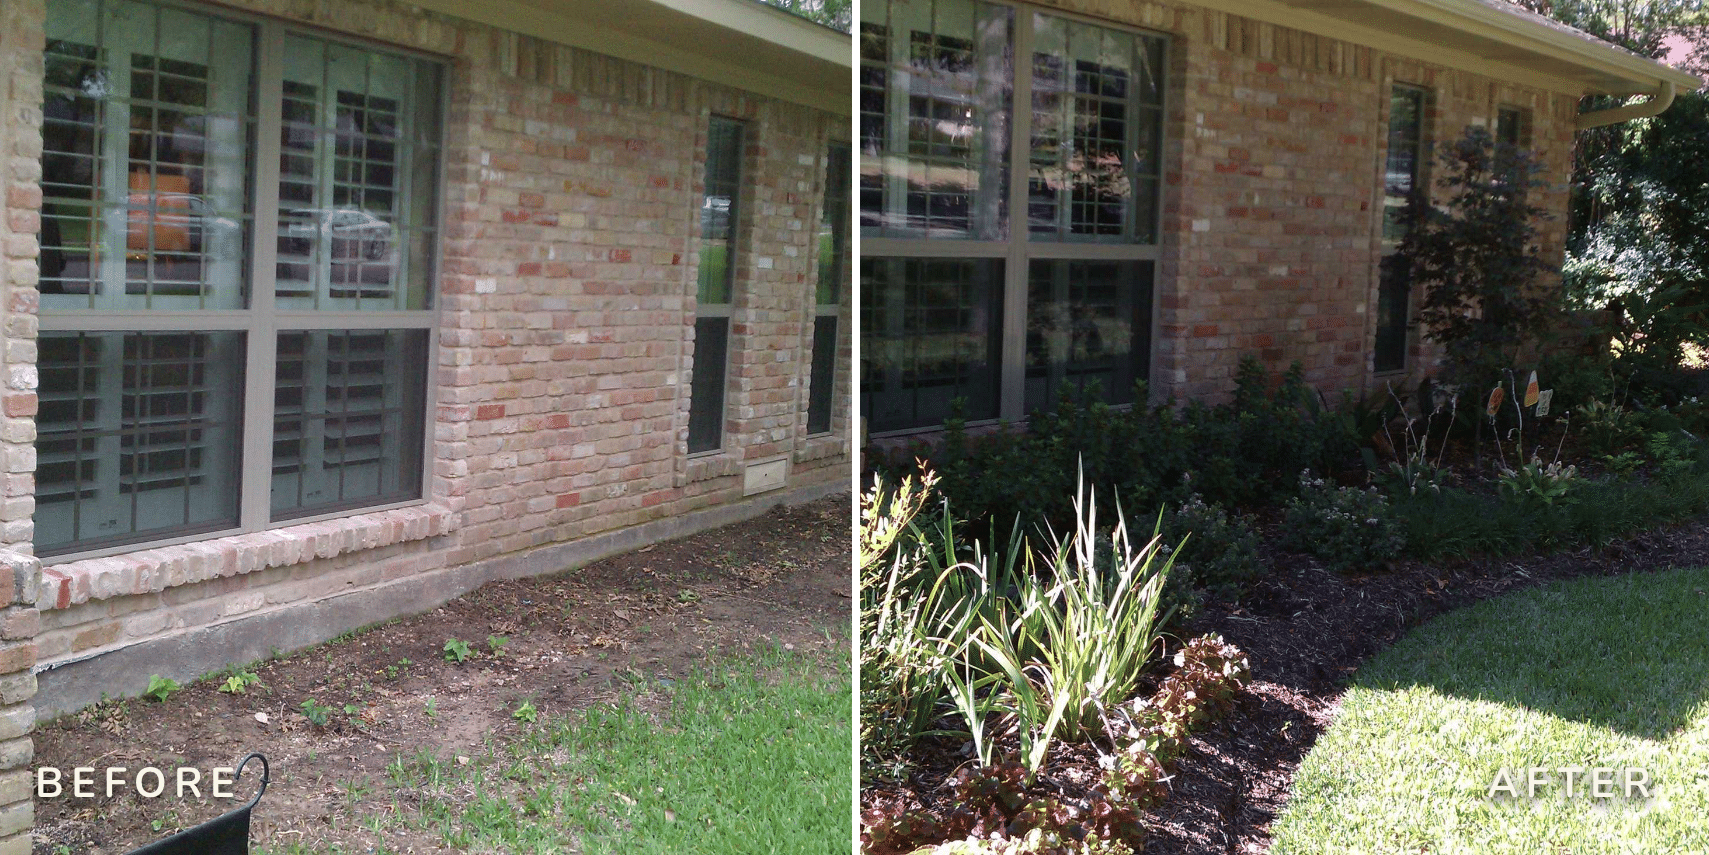 Before and After Image of Yard with no plants before and many flowers and plants after